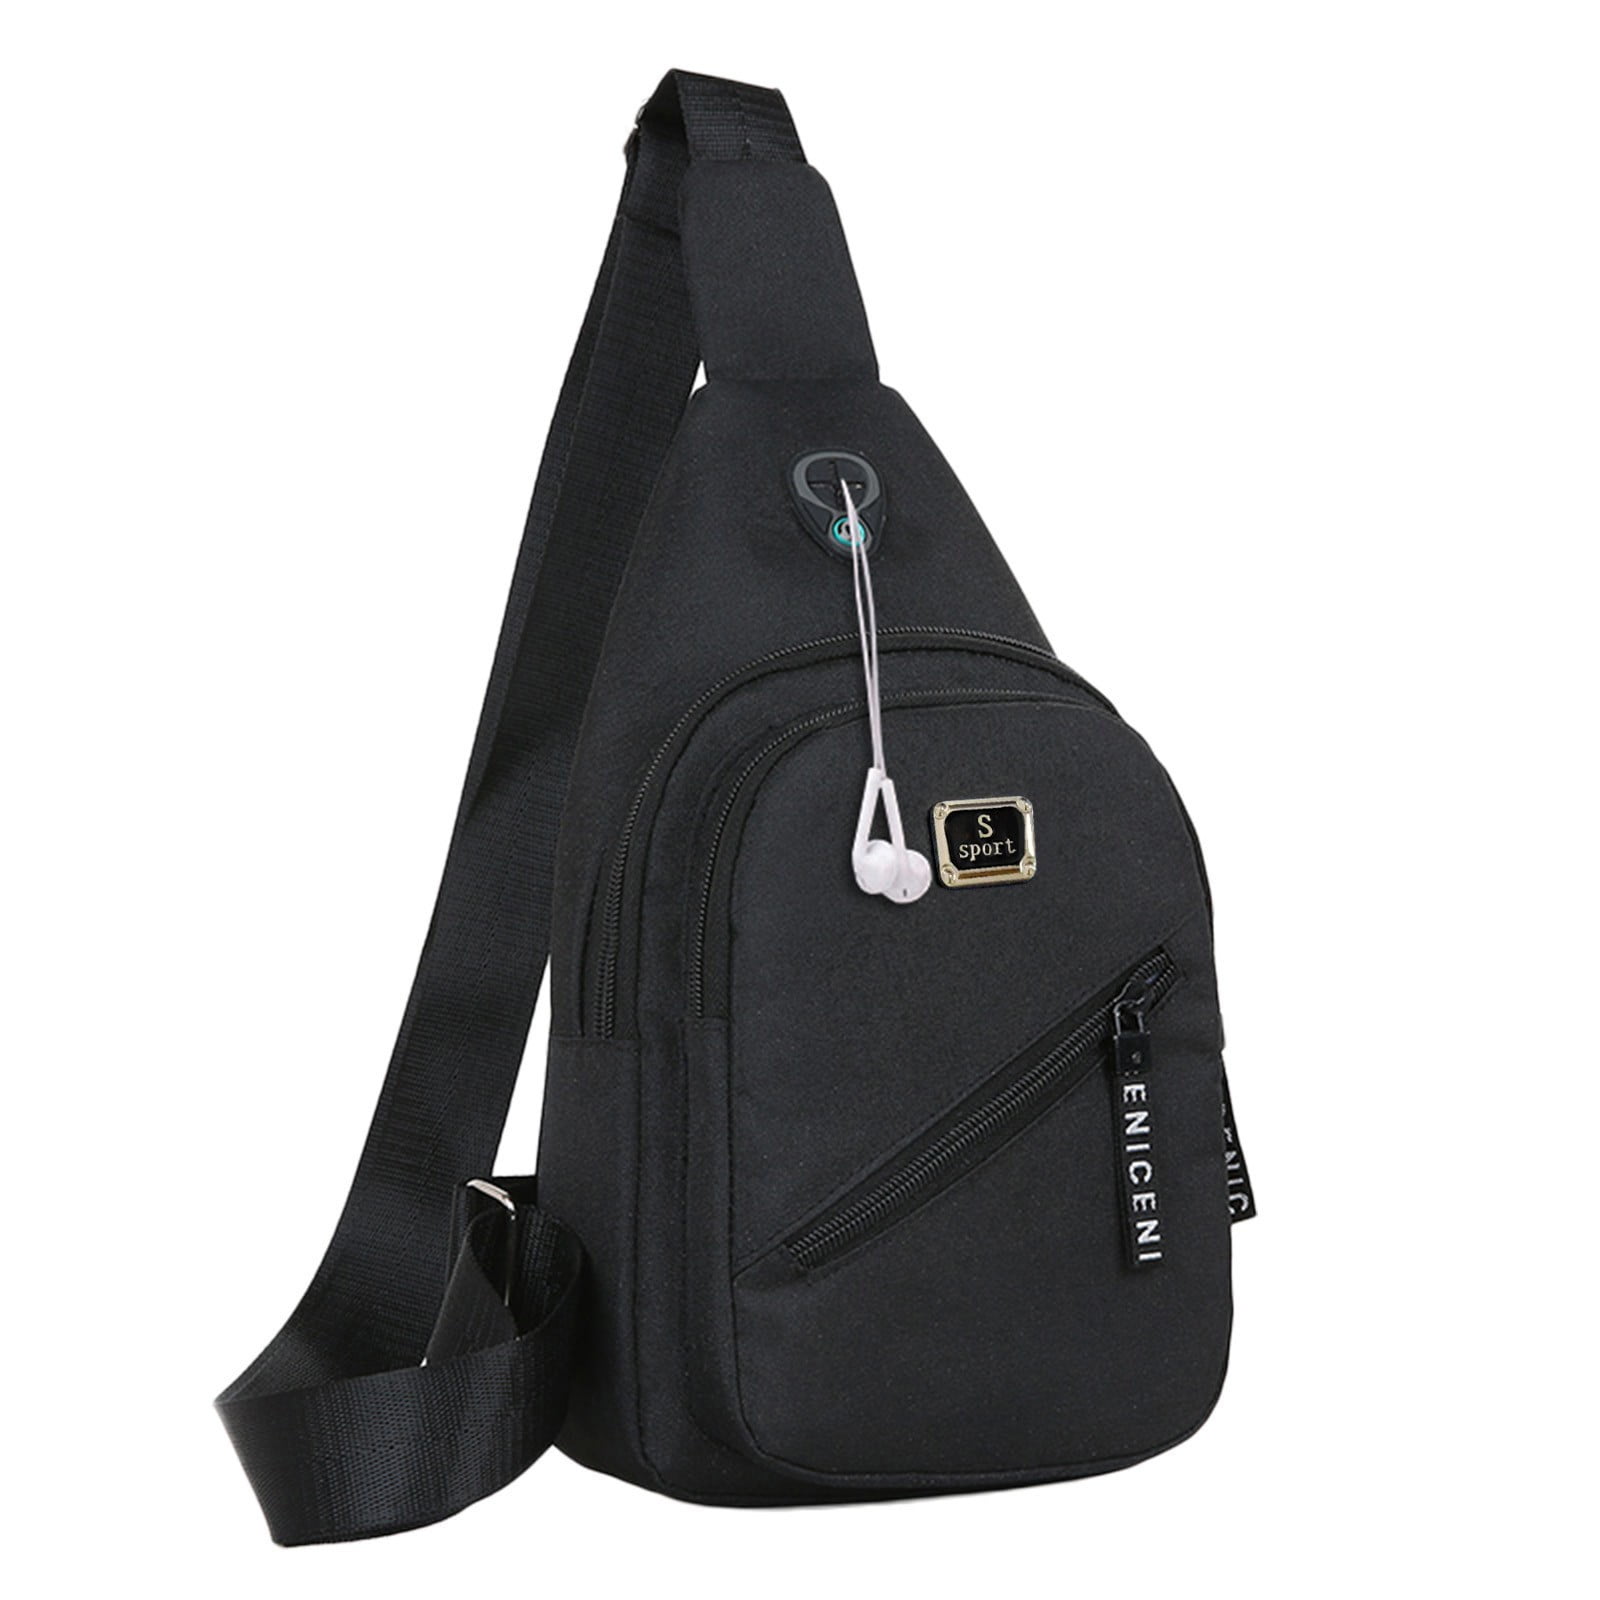 Chest Bag Male Messenger Bag Casual Student Small Backpack PU Leather Male Shoulder Bag Black Size : A 